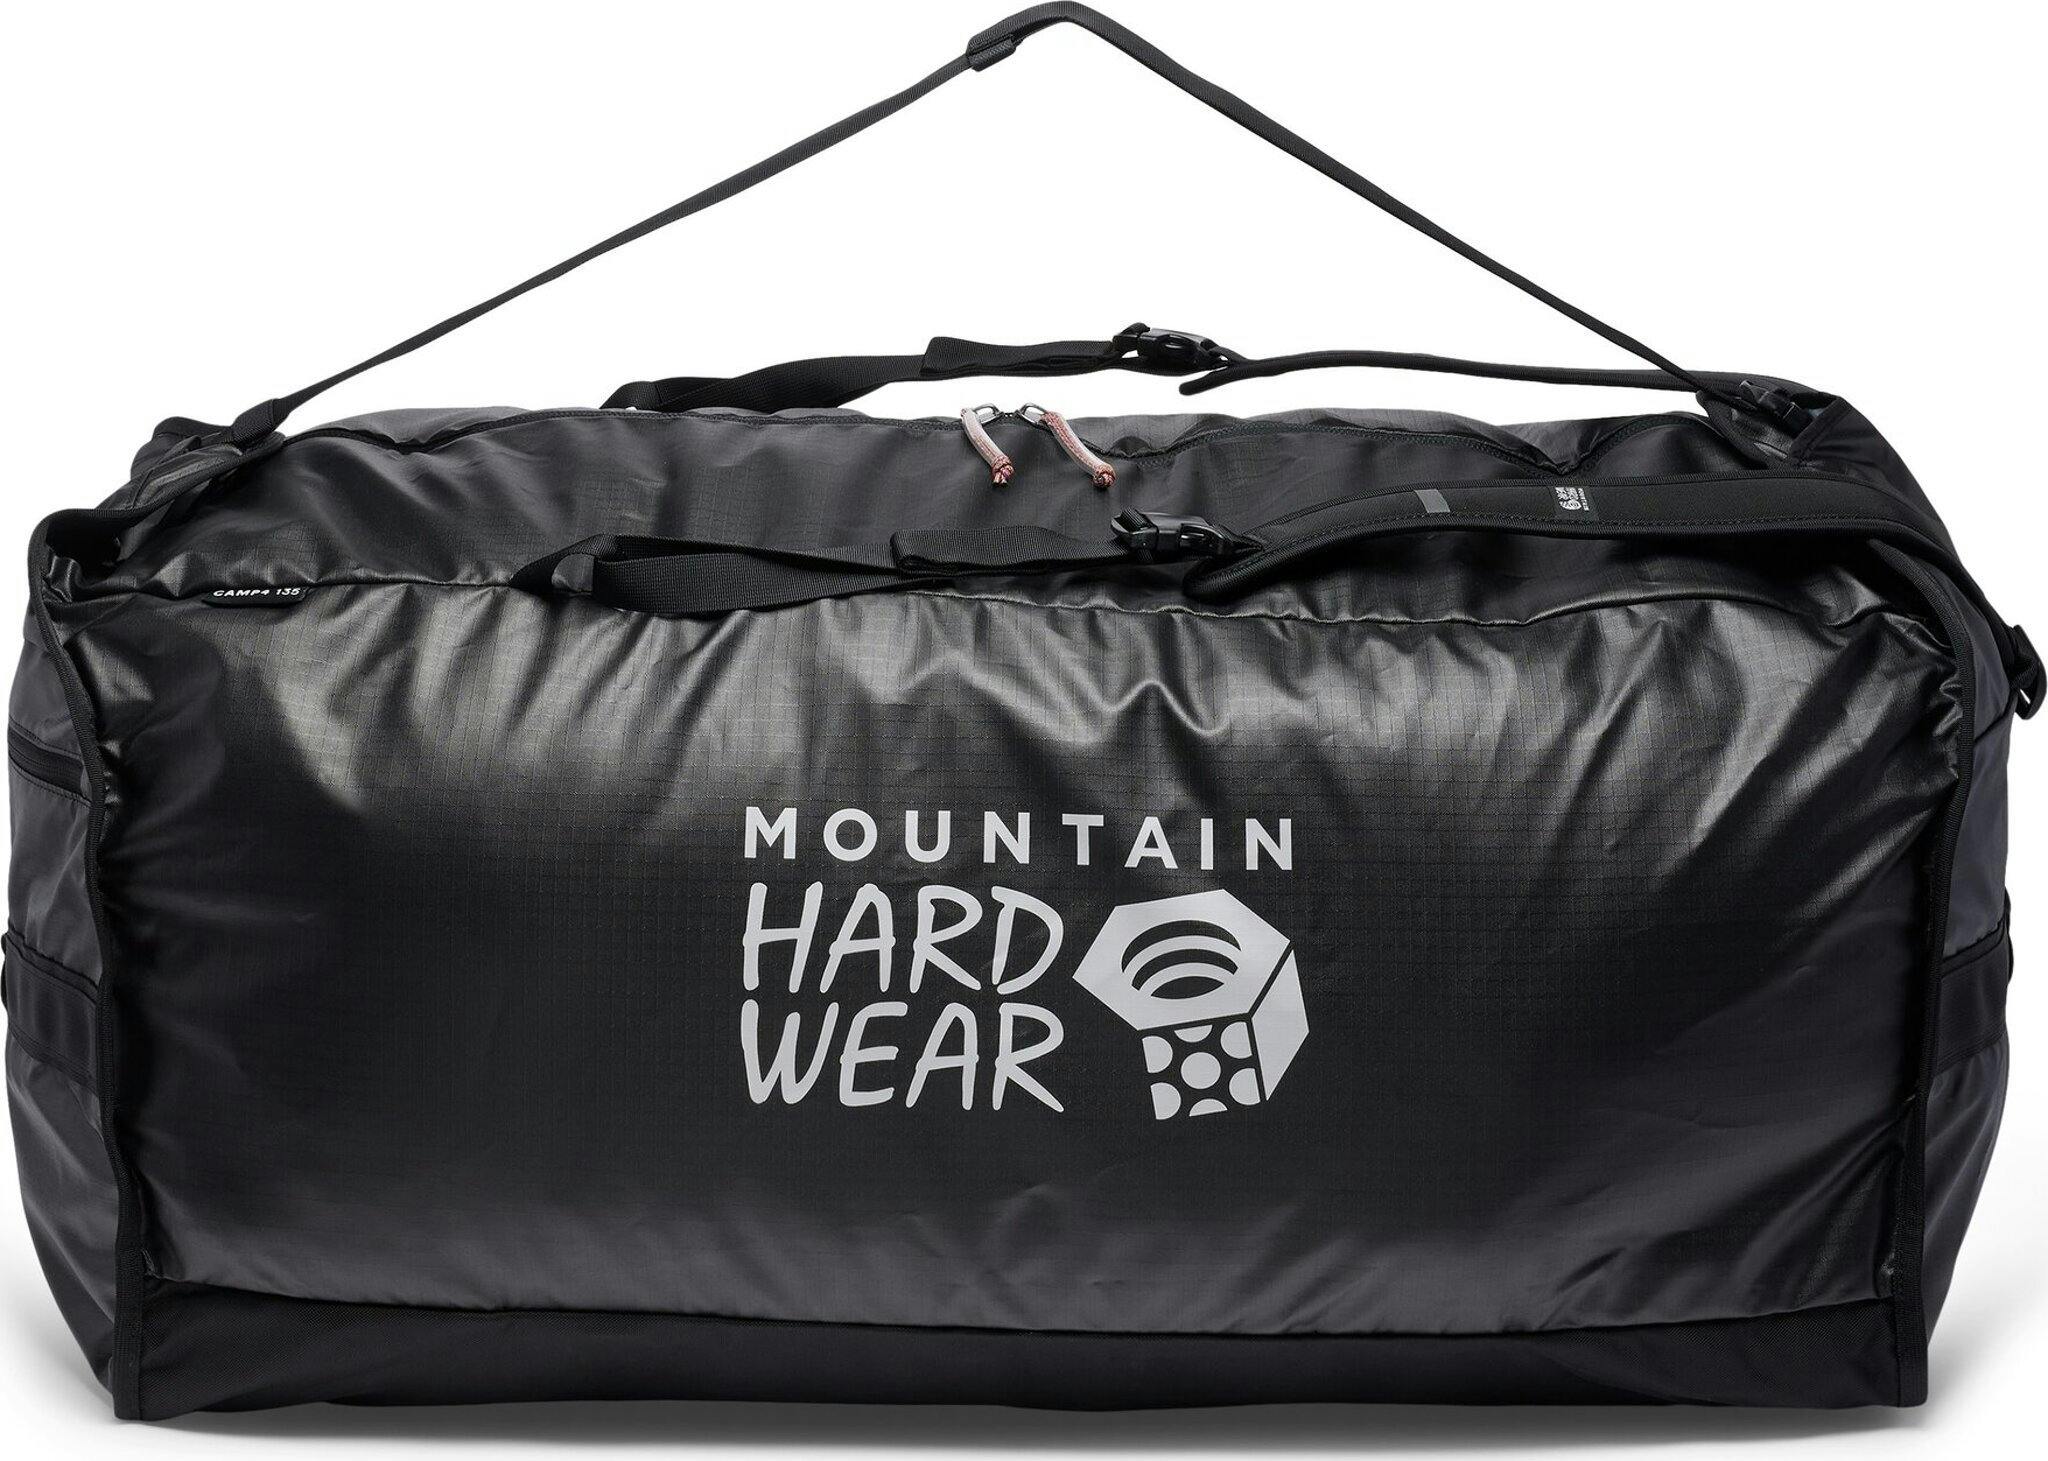 Product image for Camp 4 Duffel 135